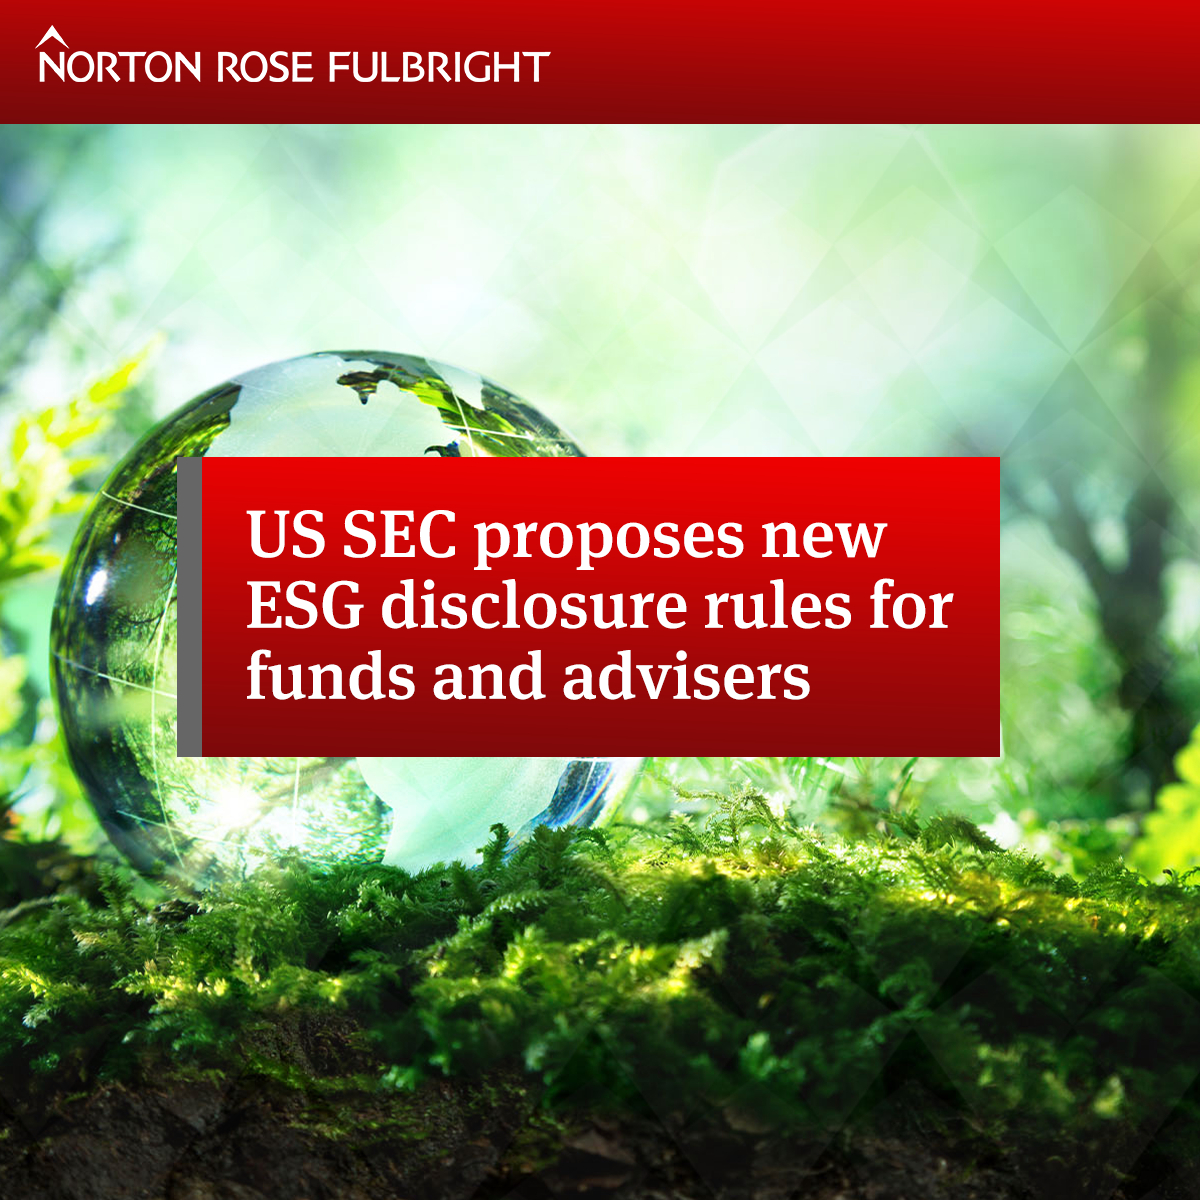 US SEC proposes new ESG disclosure rules for funds and advisers